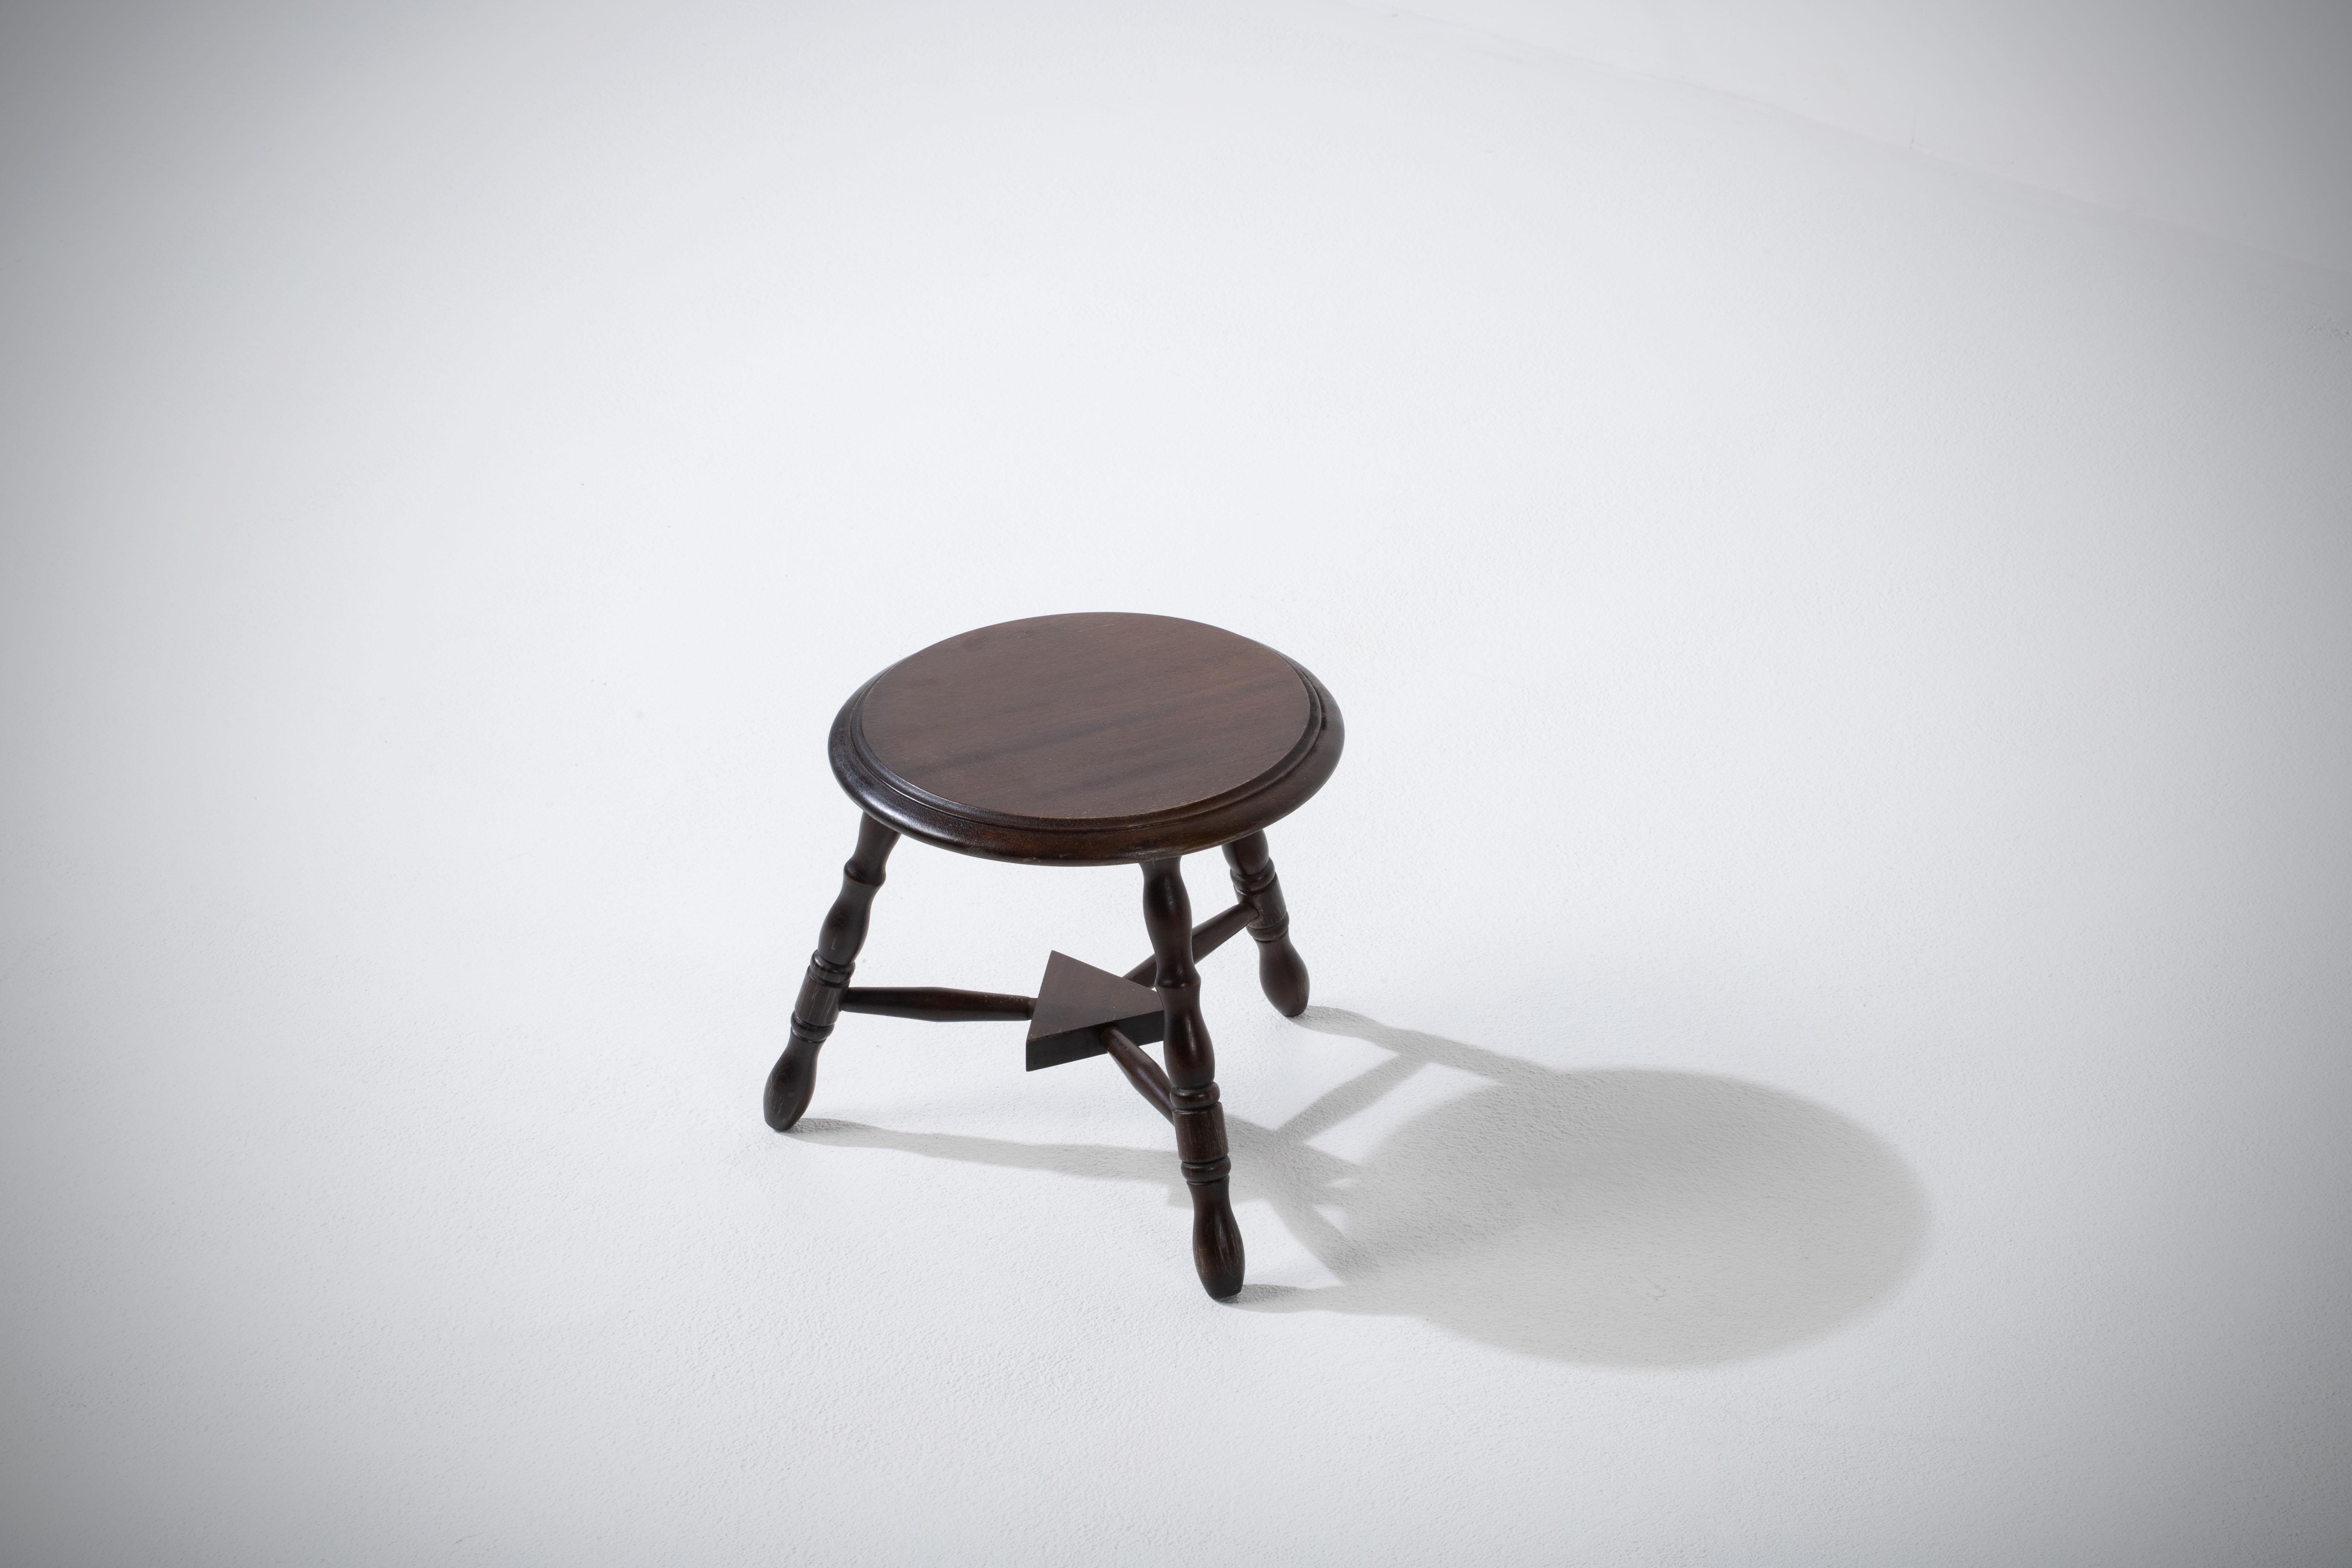 Introducing a fantastic midcentury wooden stool, crafted in France during the 1960s. This piece is constructed without the use of hardware, boasting an elegant round seat, flared legs, and intricate gouge work, all made from walnut.

The design is